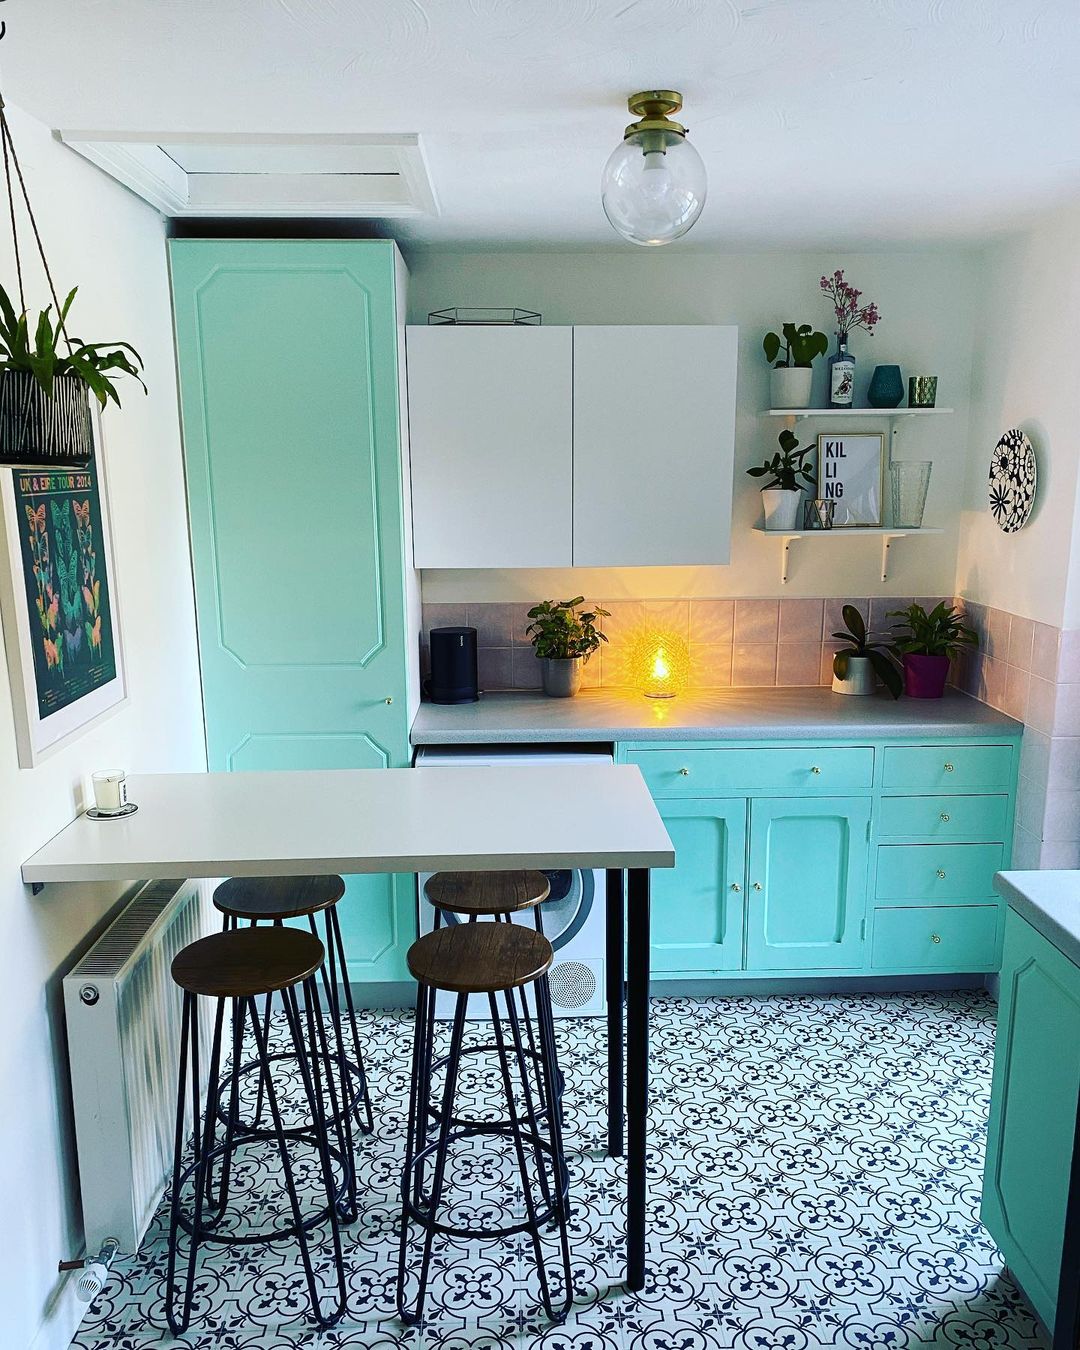 7 Small Kitchen Cabinet Ideas to Make the Most of Every Inch